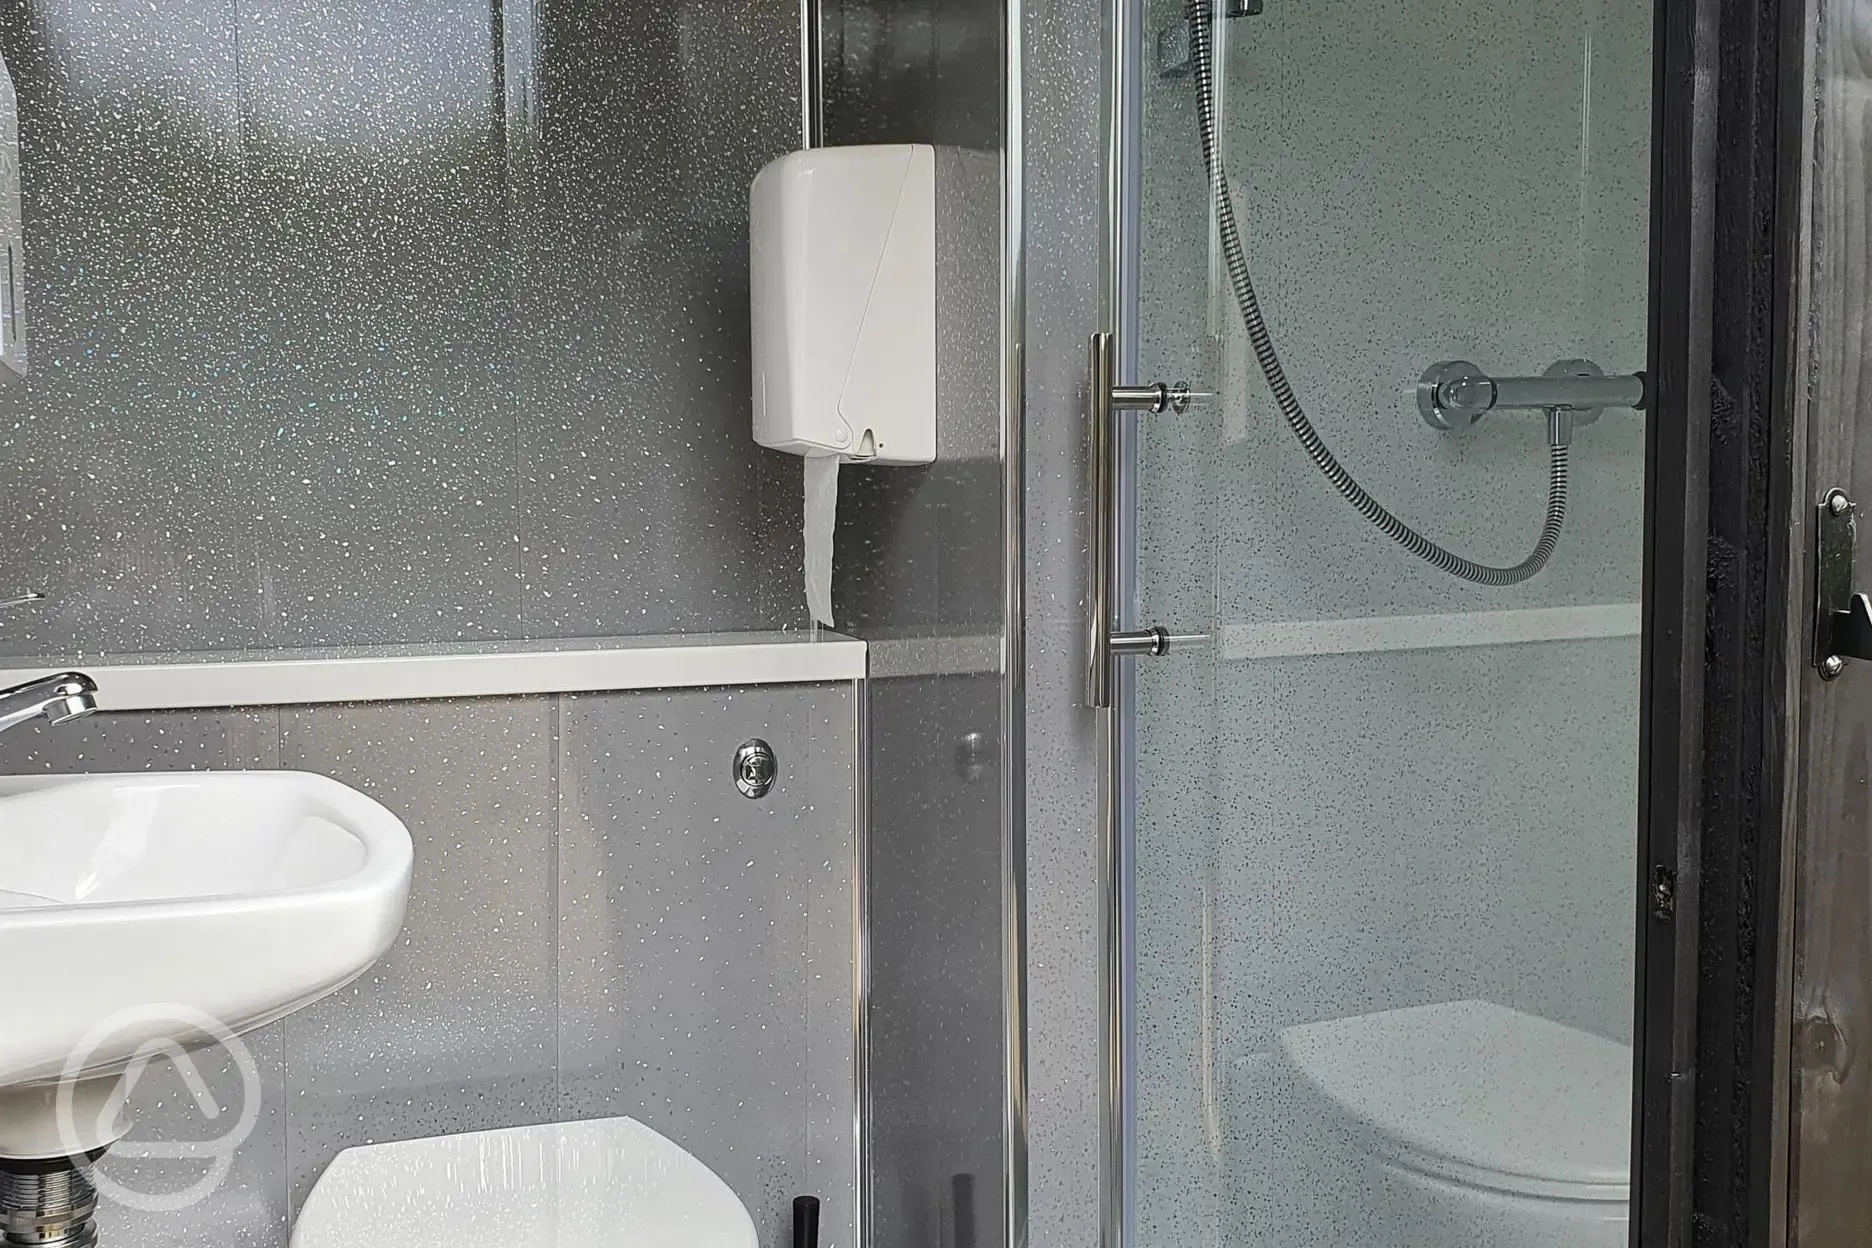 Shower rooms with endless hot water and flushing loos!